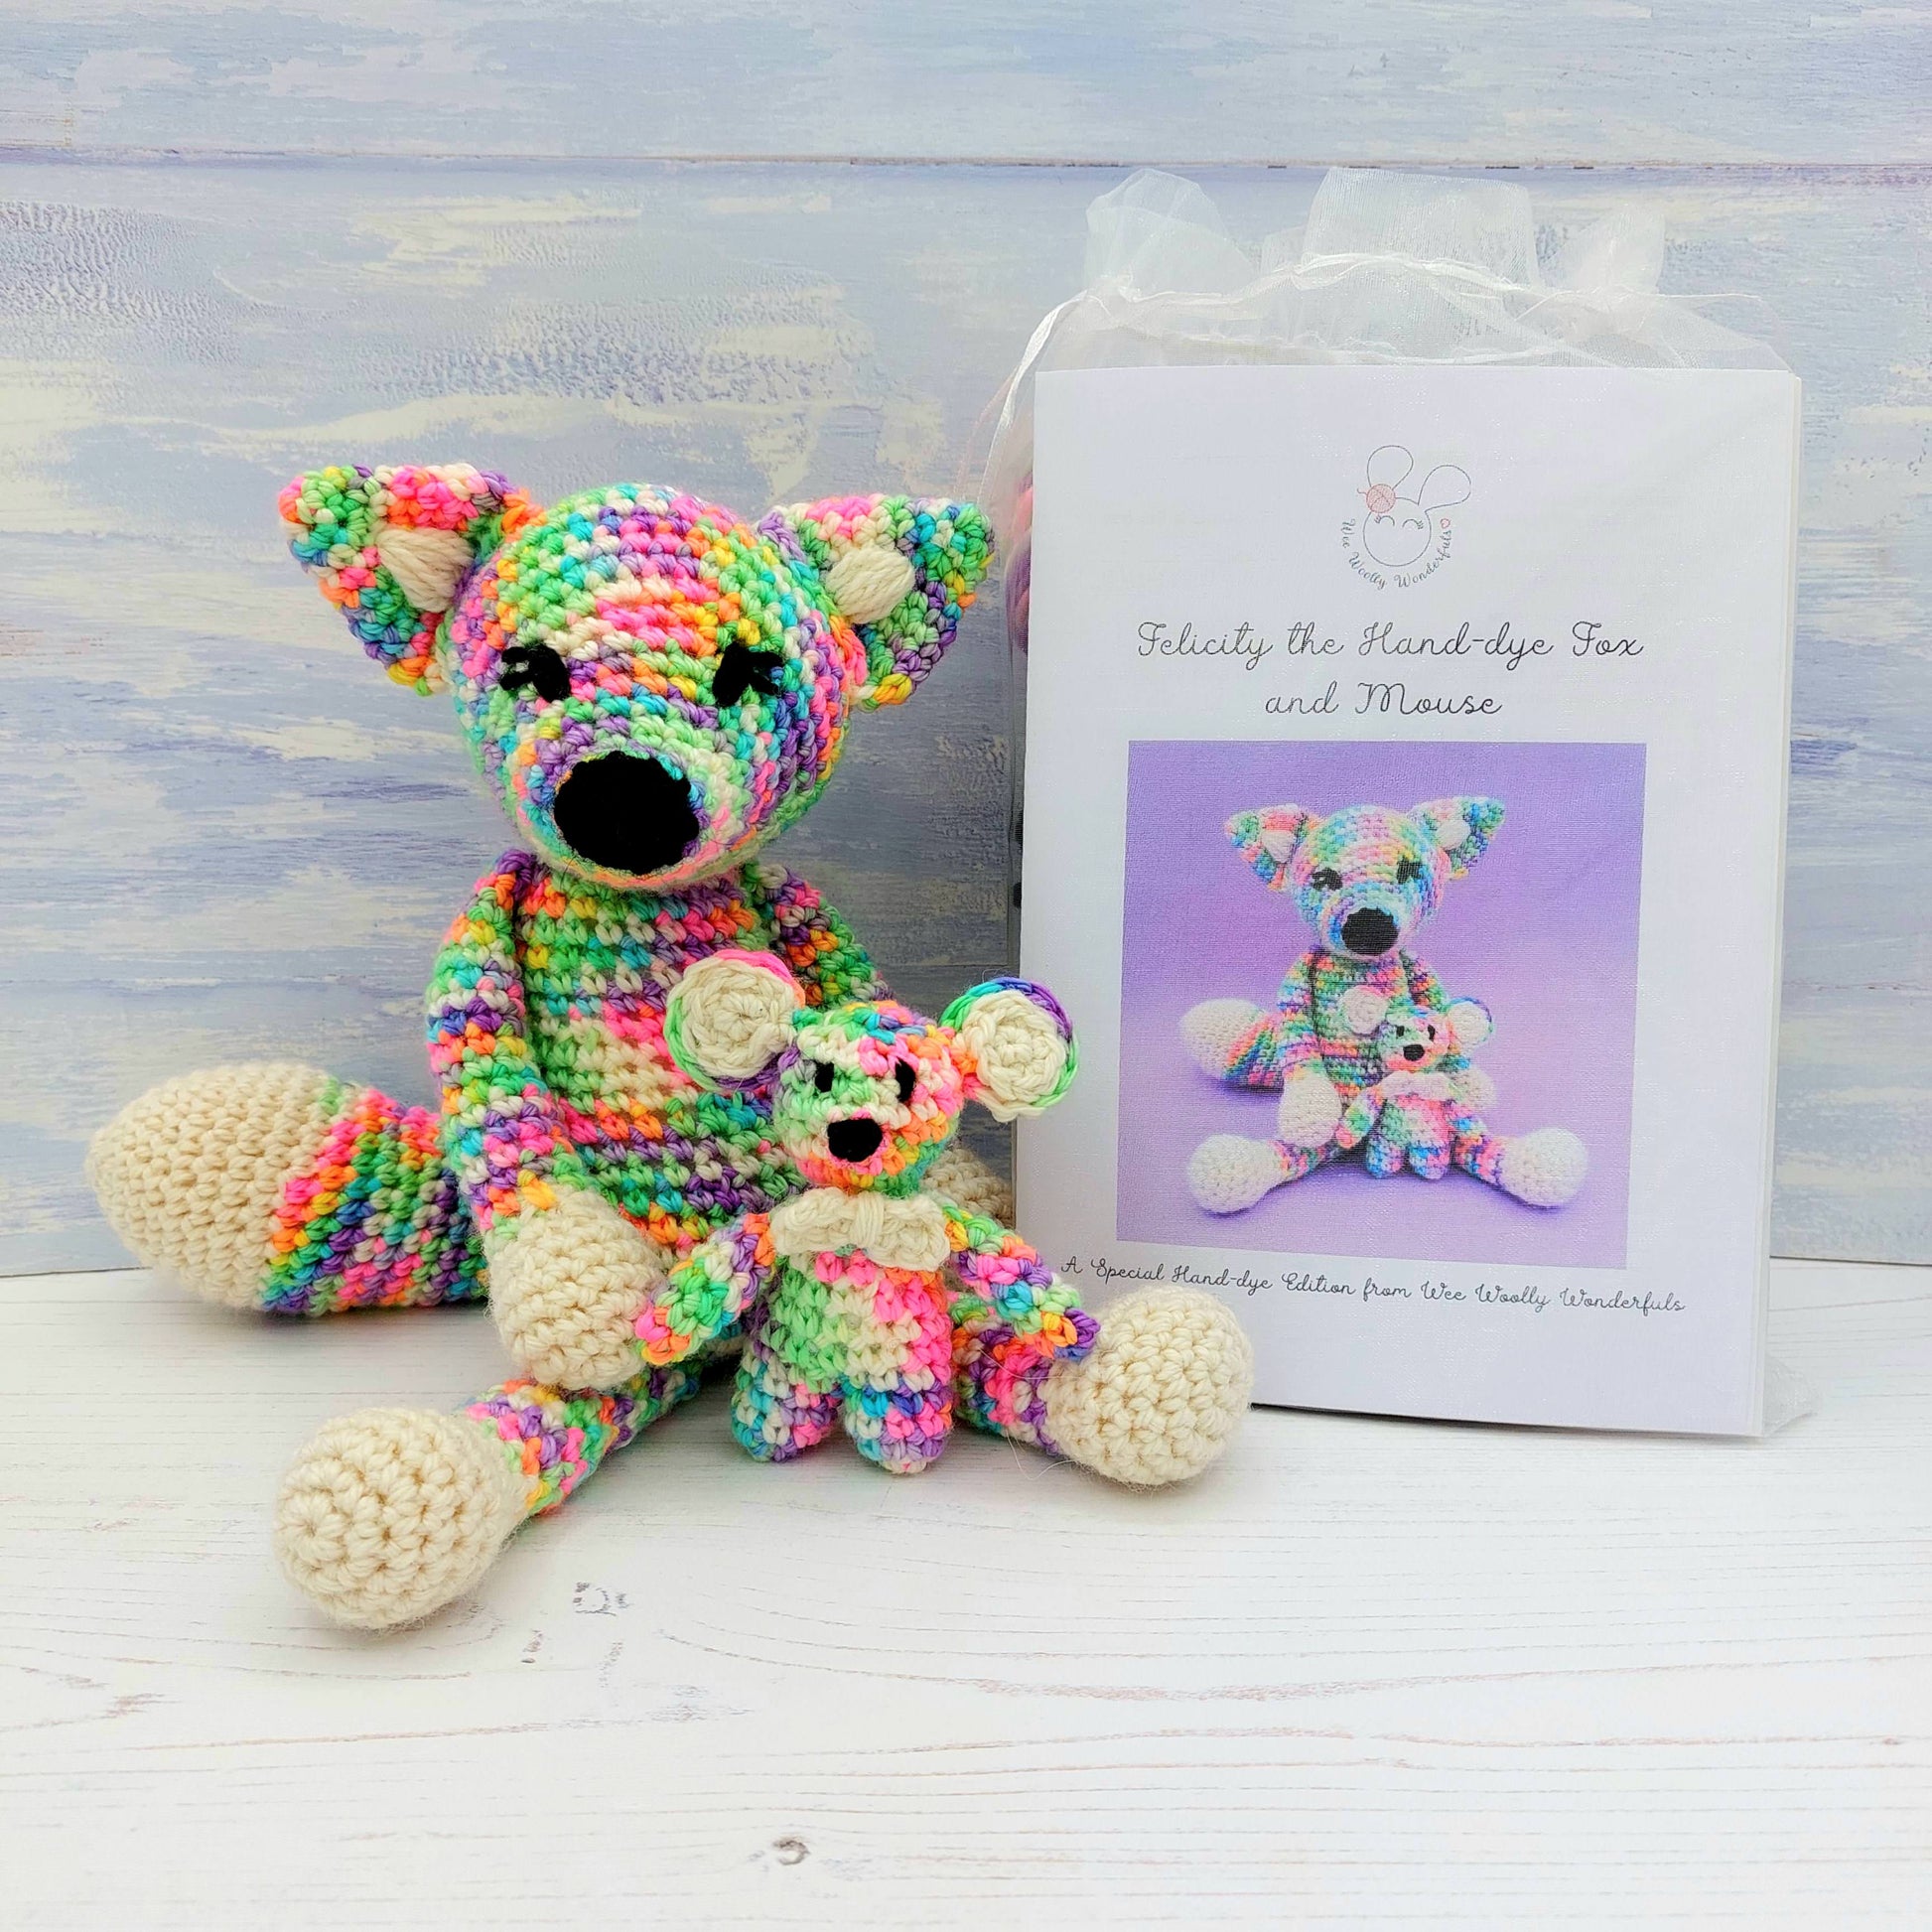 Crochet Toys made from Hand-dyed Wool